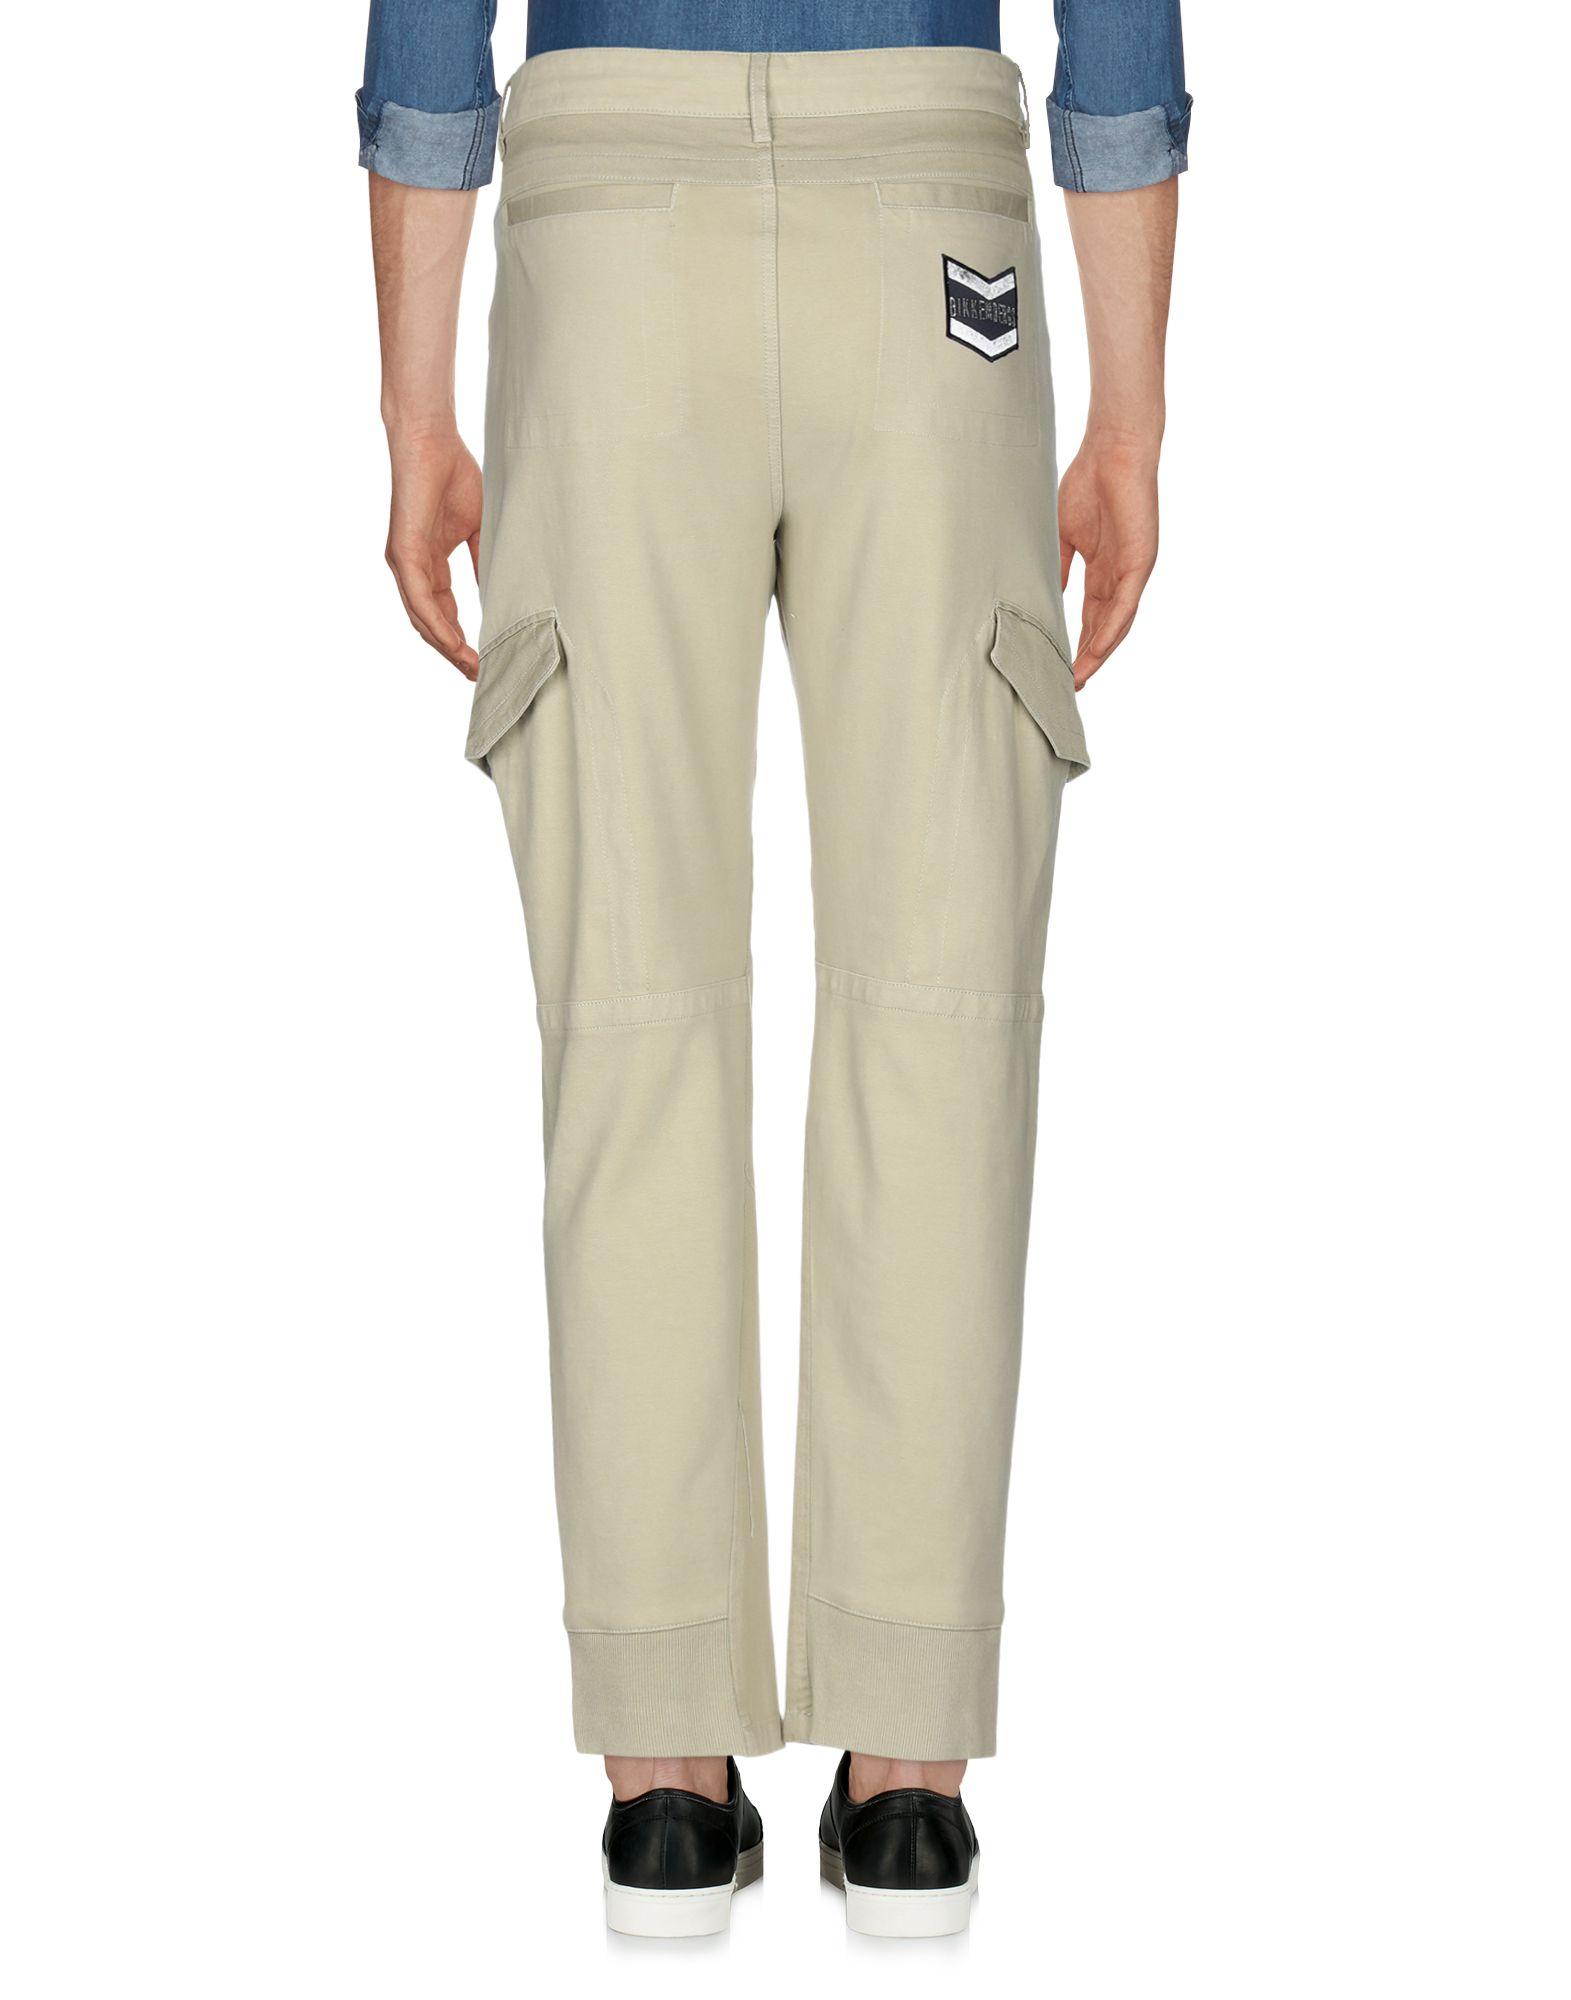 Bikkembergs Cotton Casual Pants in Beige (Natural) for Men - Lyst